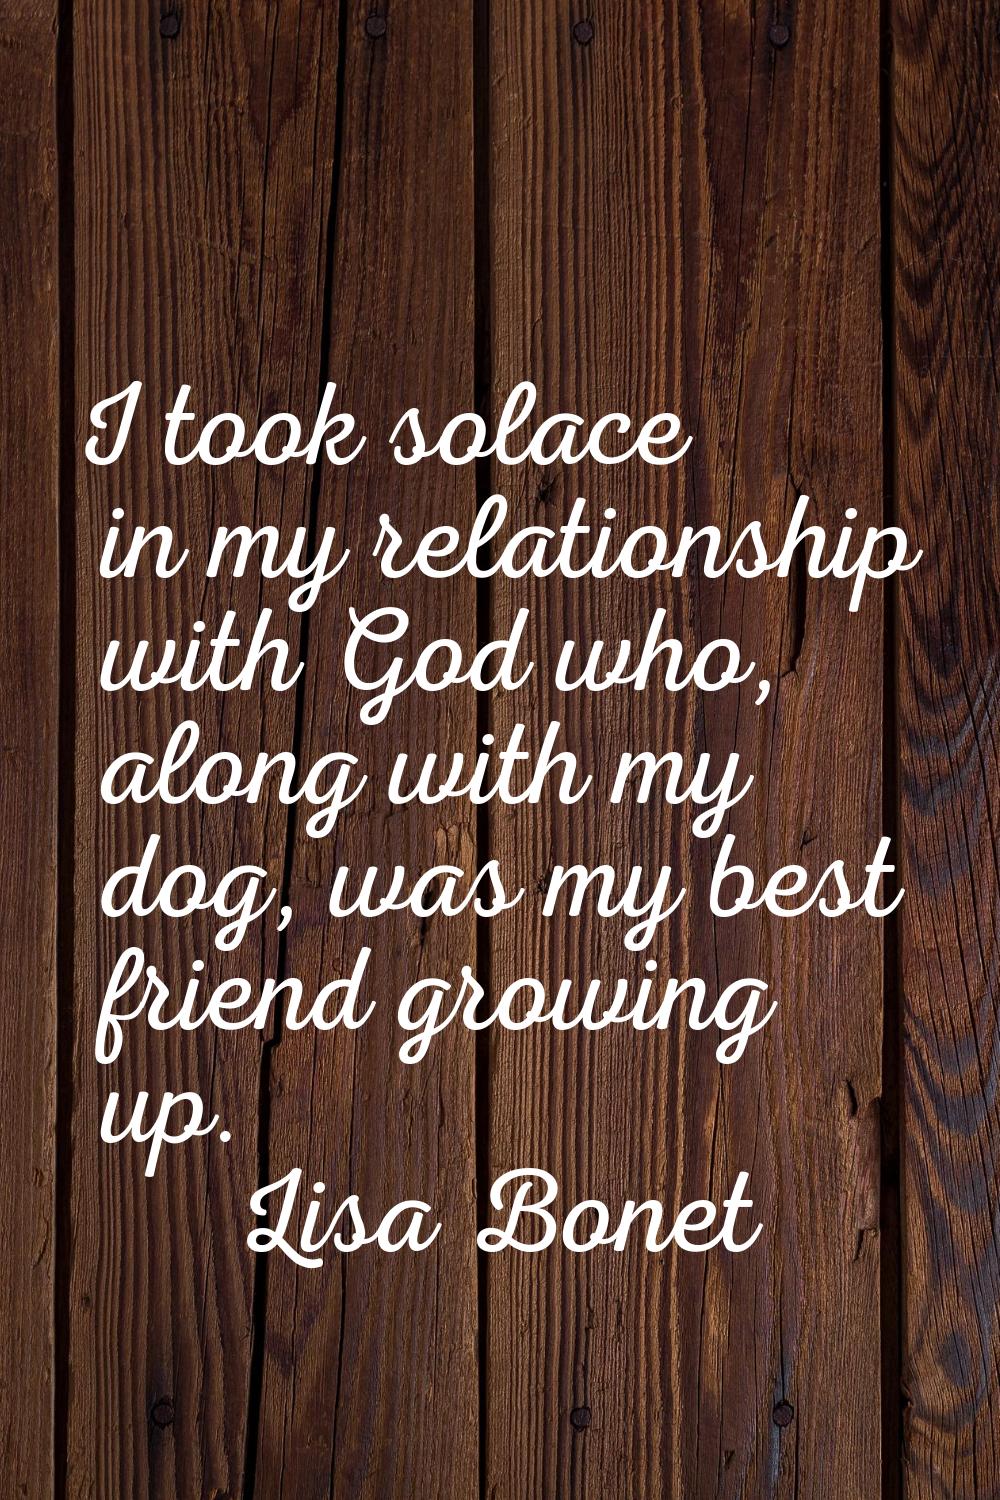 I took solace in my relationship with God who, along with my dog, was my best friend growing up.